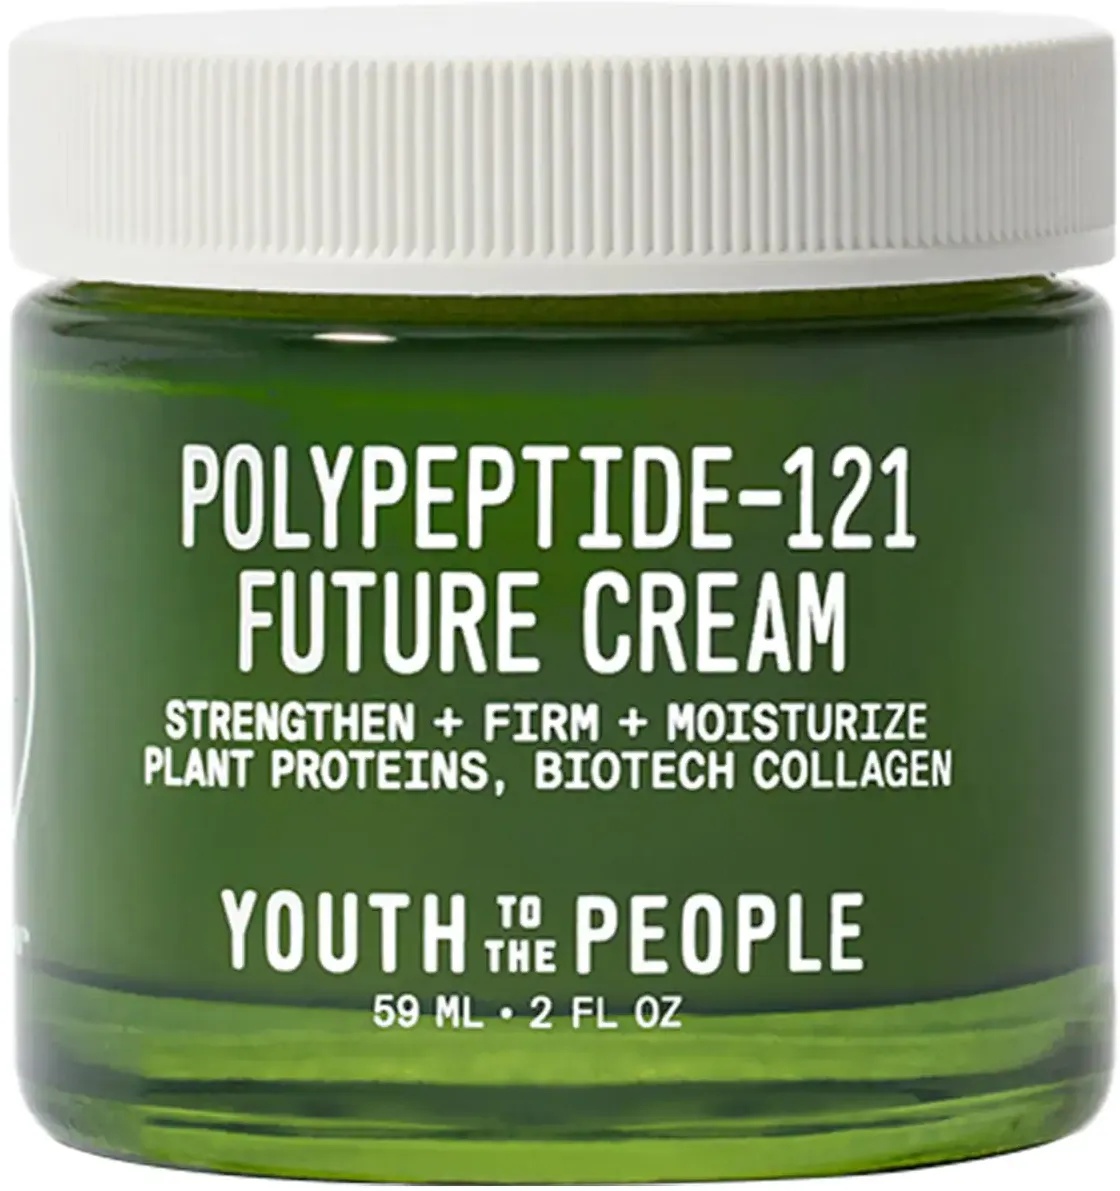 Youth To The People Polypeptide-121 Future Cream With Peptides And Ceramides